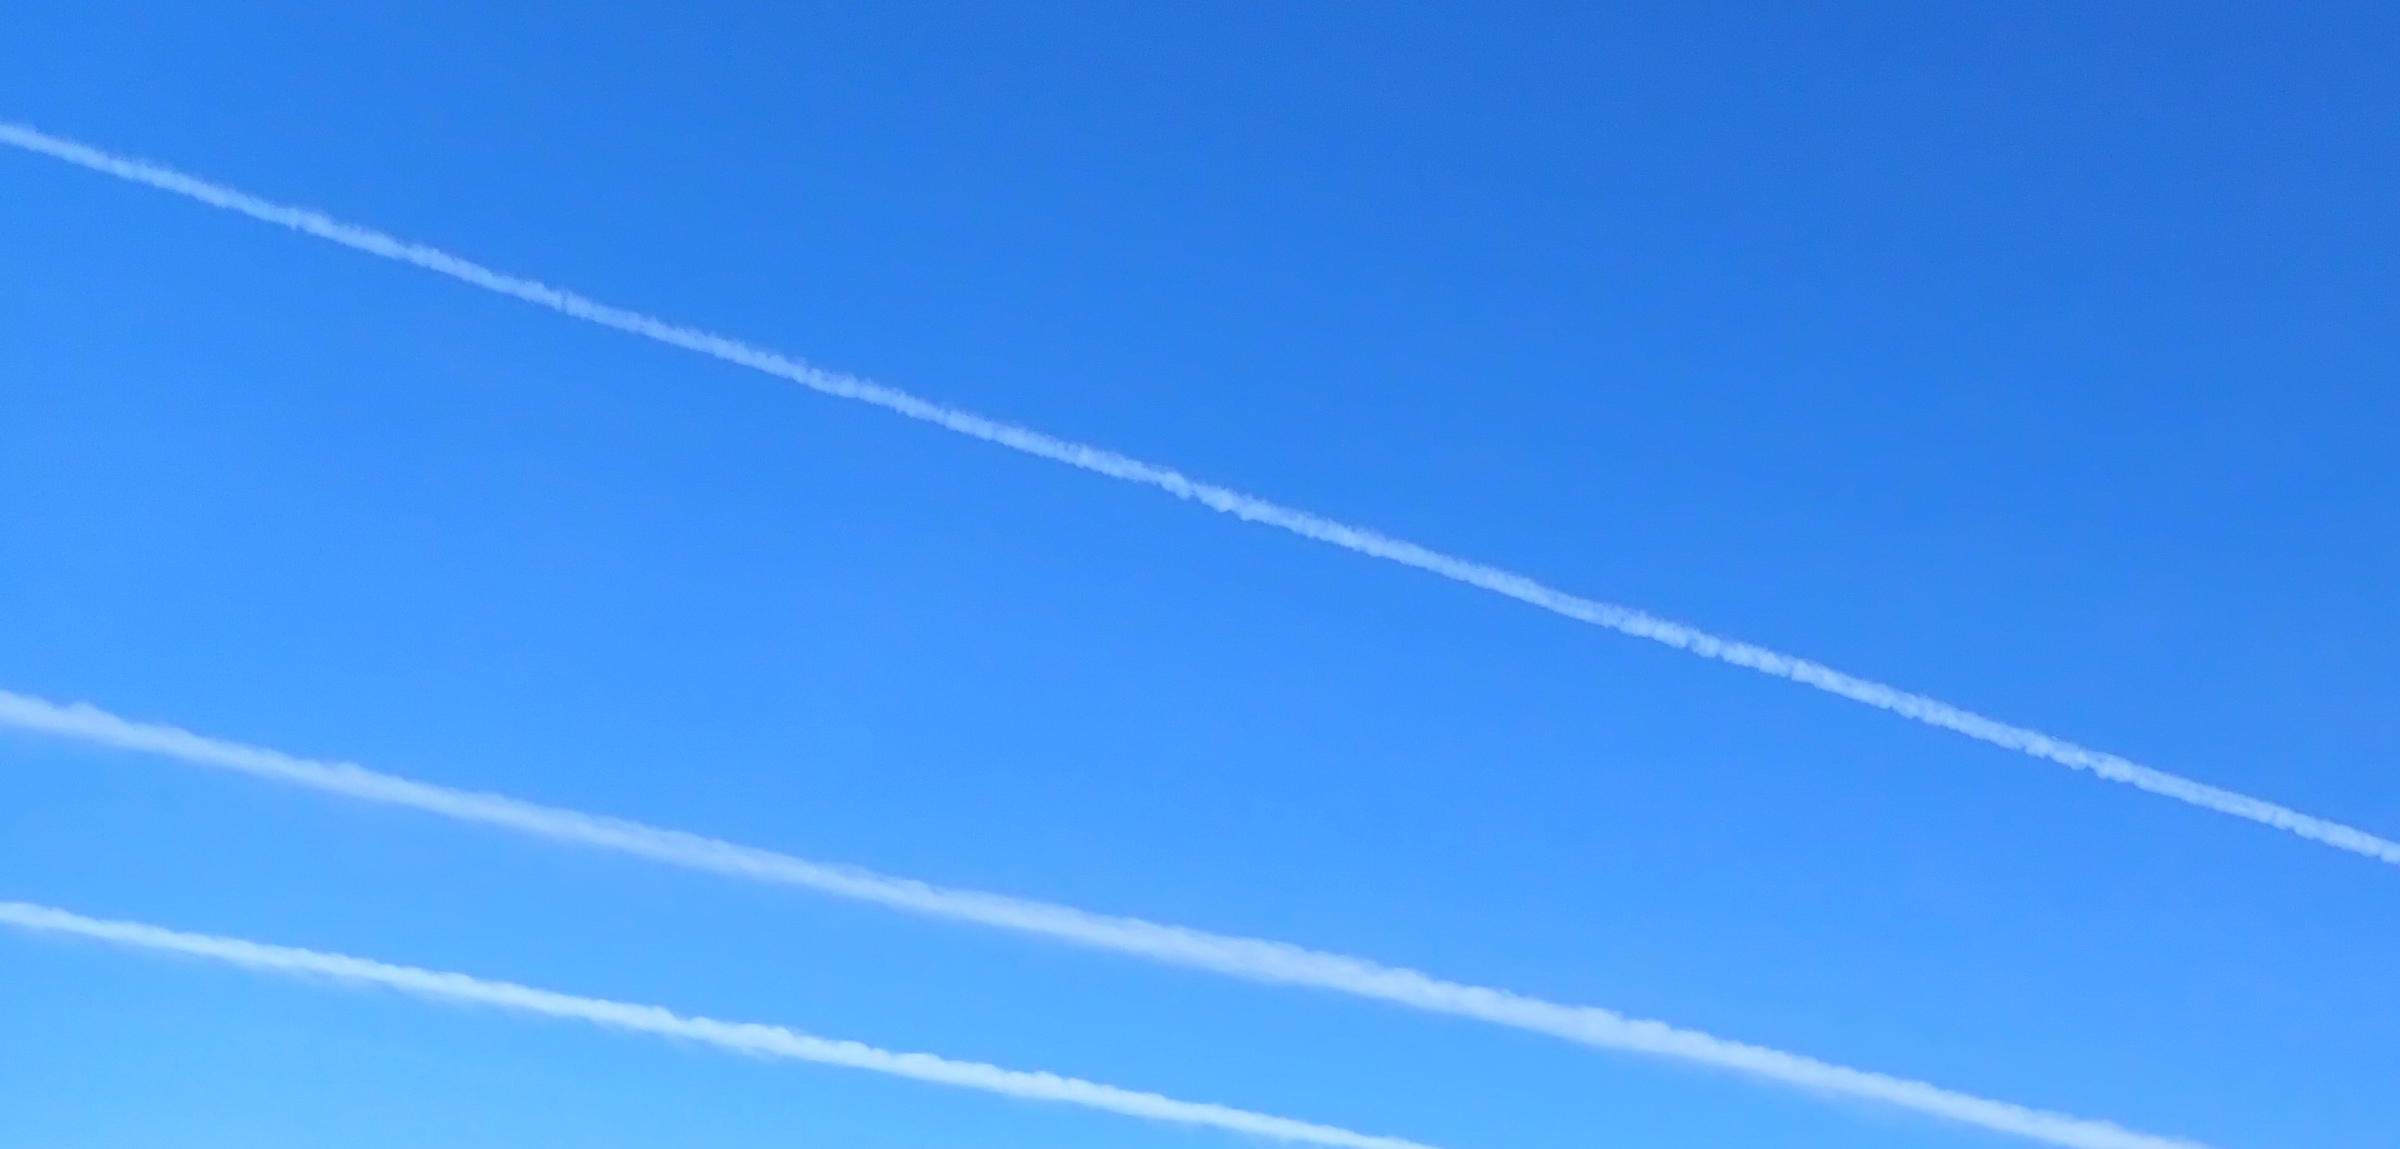 blue sky with aircraft 'vapour' trails